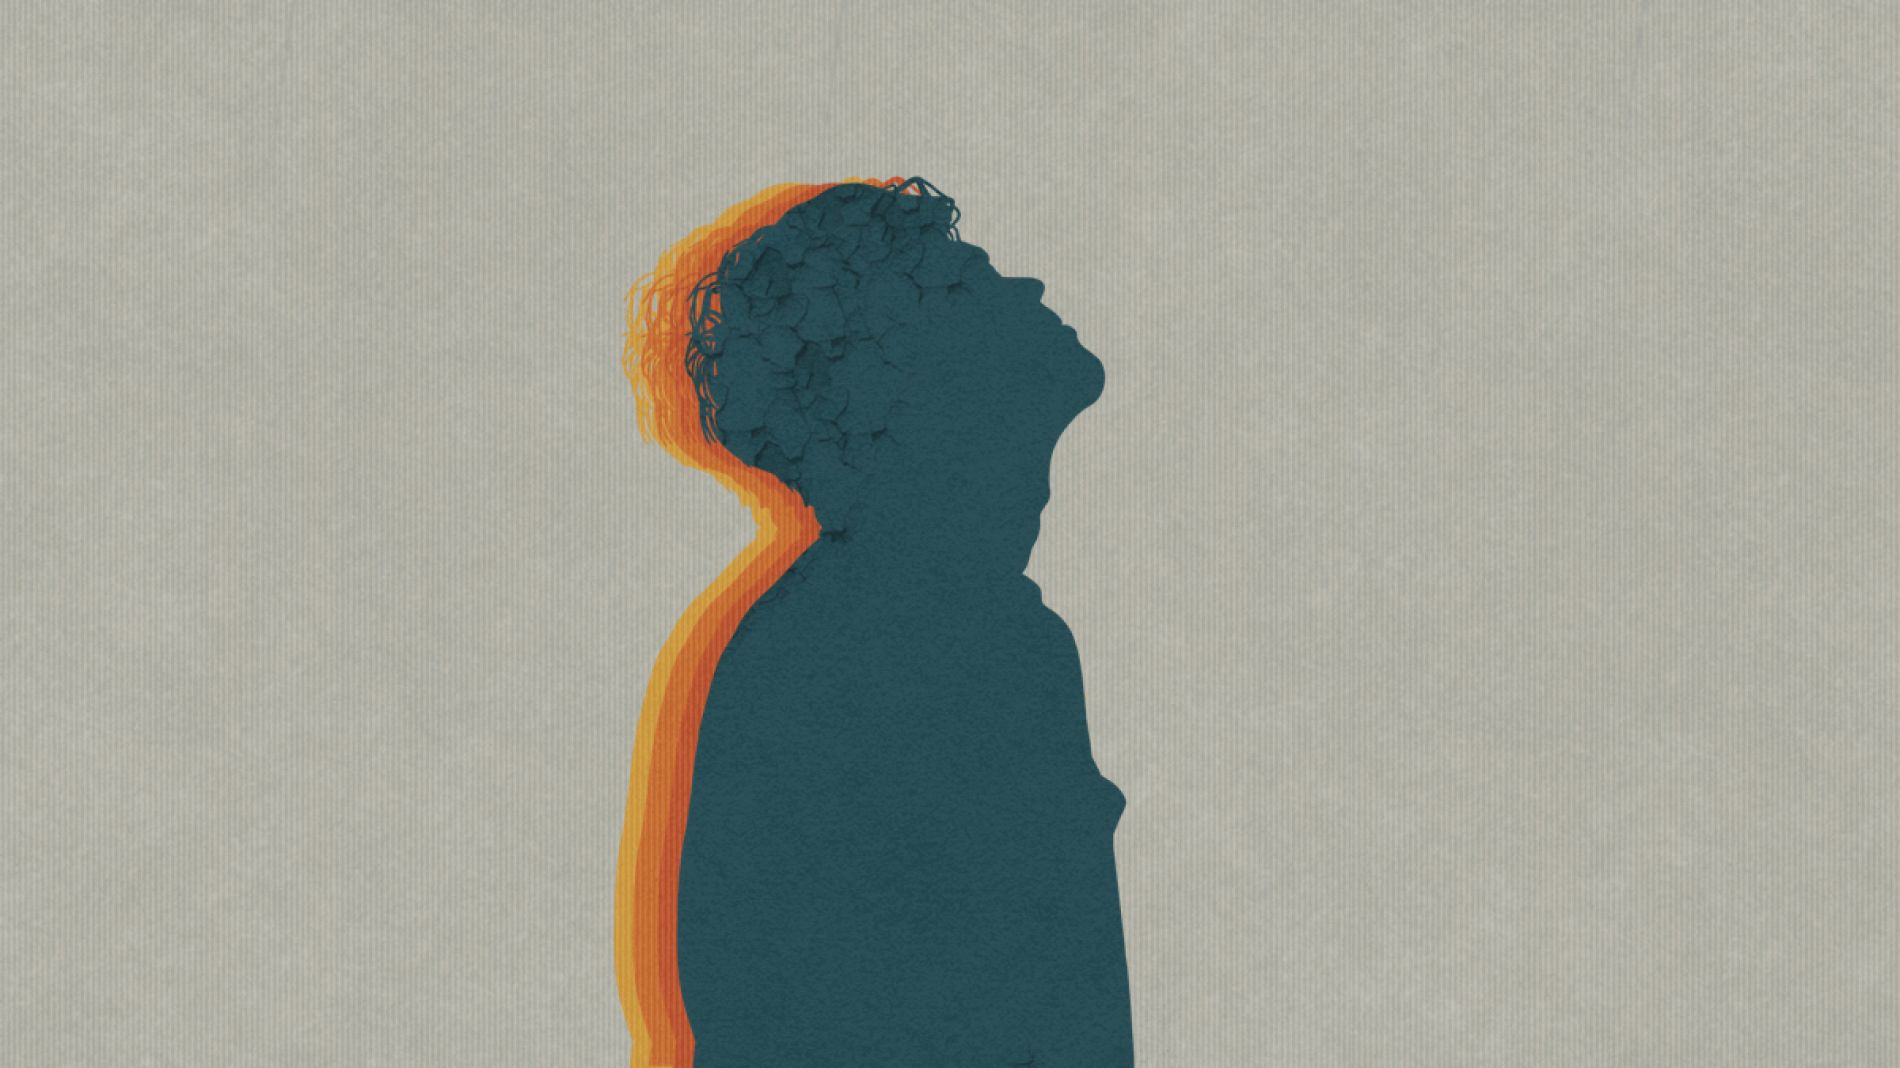 illustrated Silhouette of person looking up